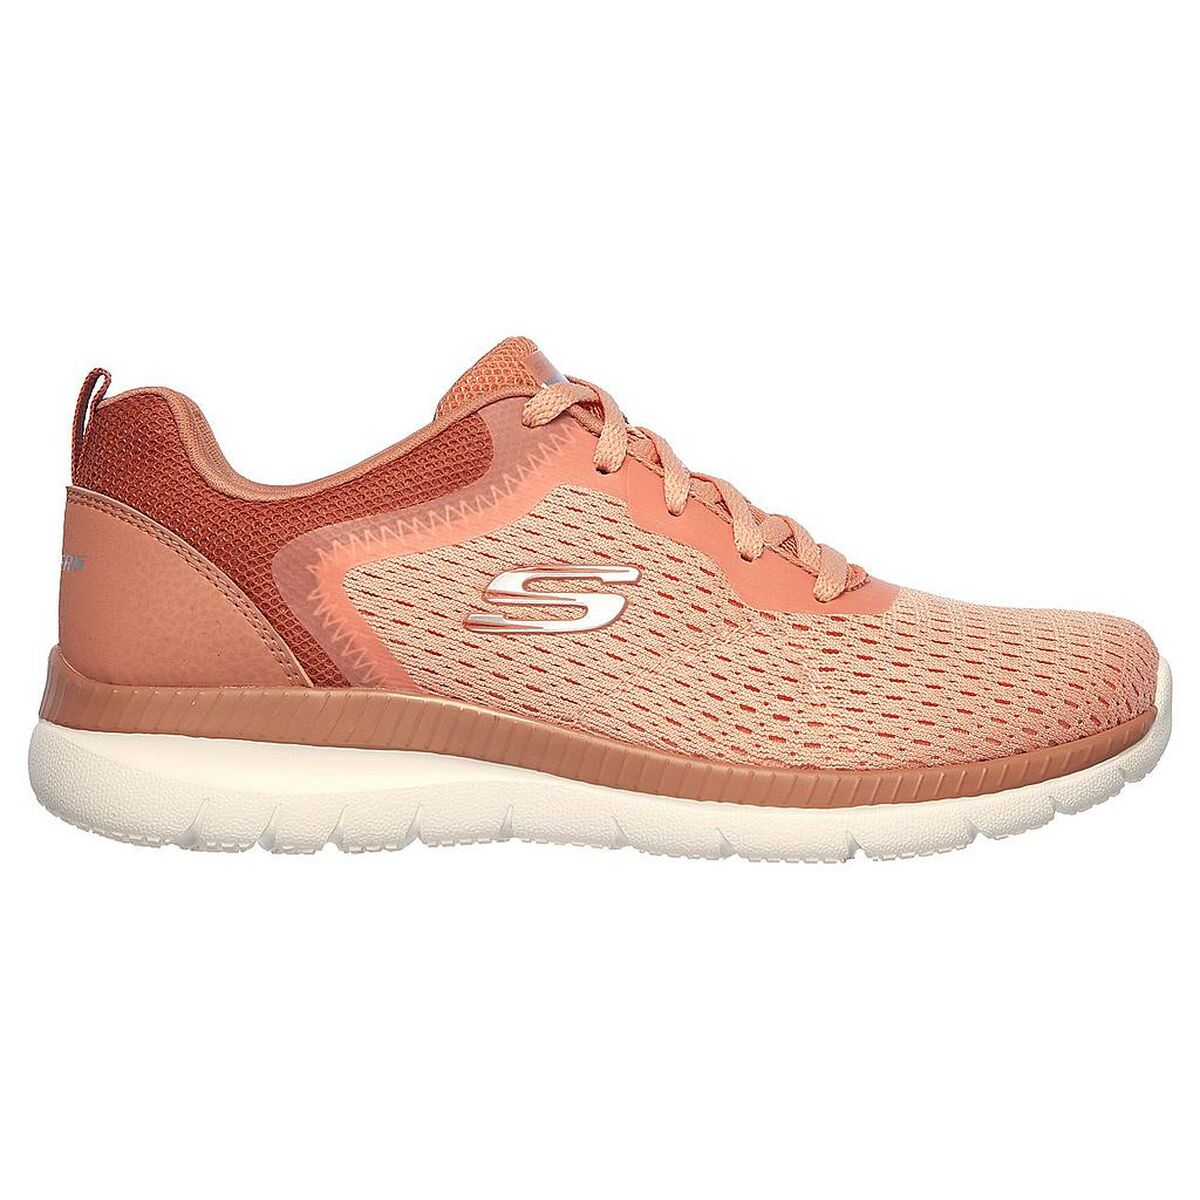 Sports Trainers for Women Skechers Bountiful Quick Path